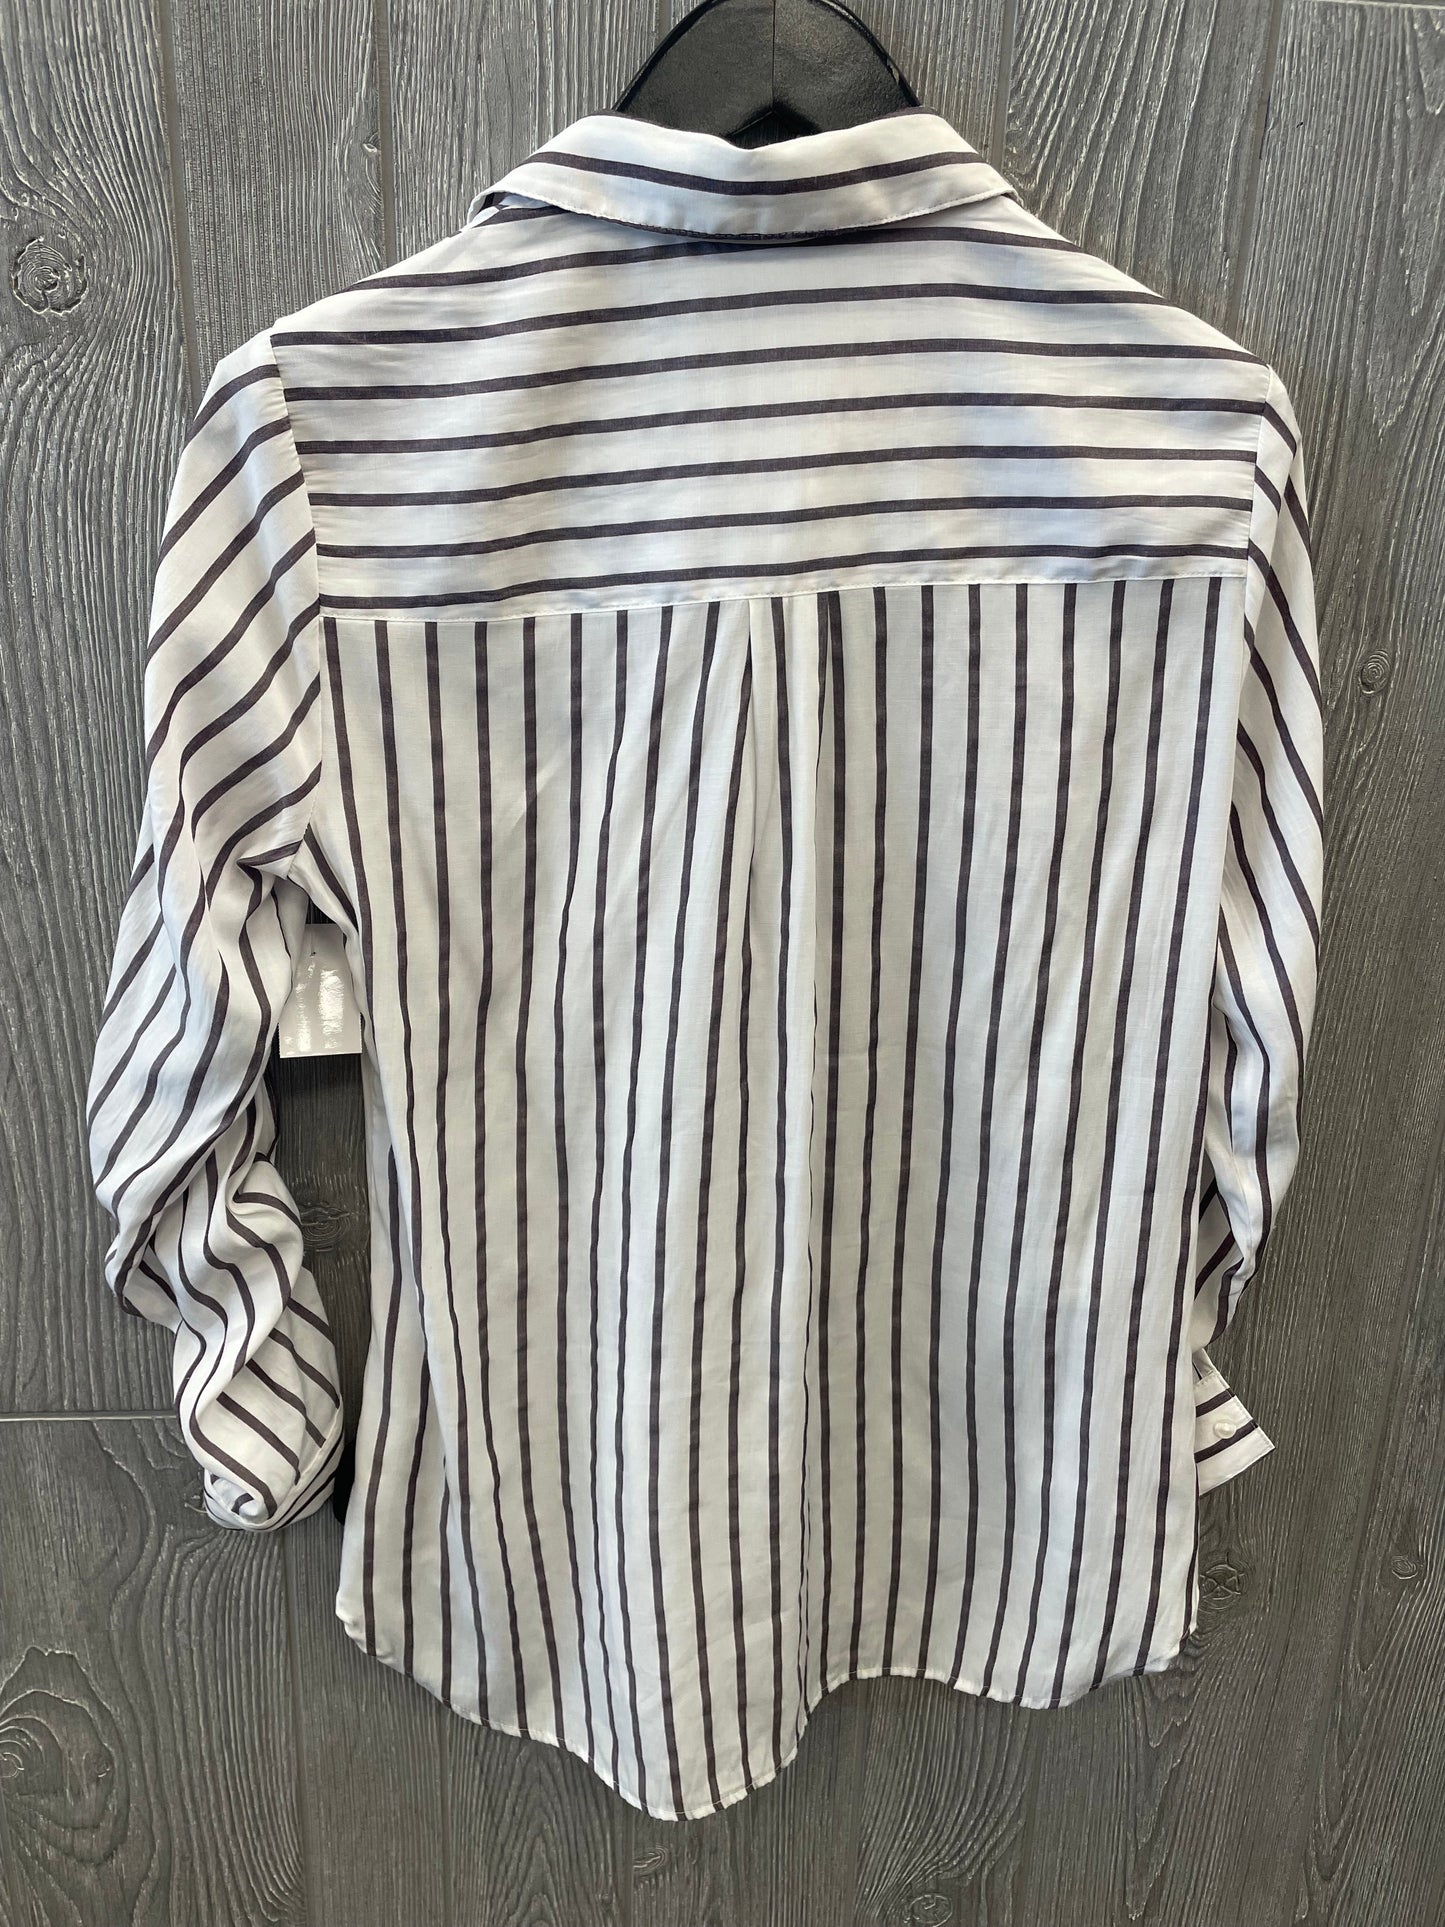 Striped Pattern Top Long Sleeve Express, Size S